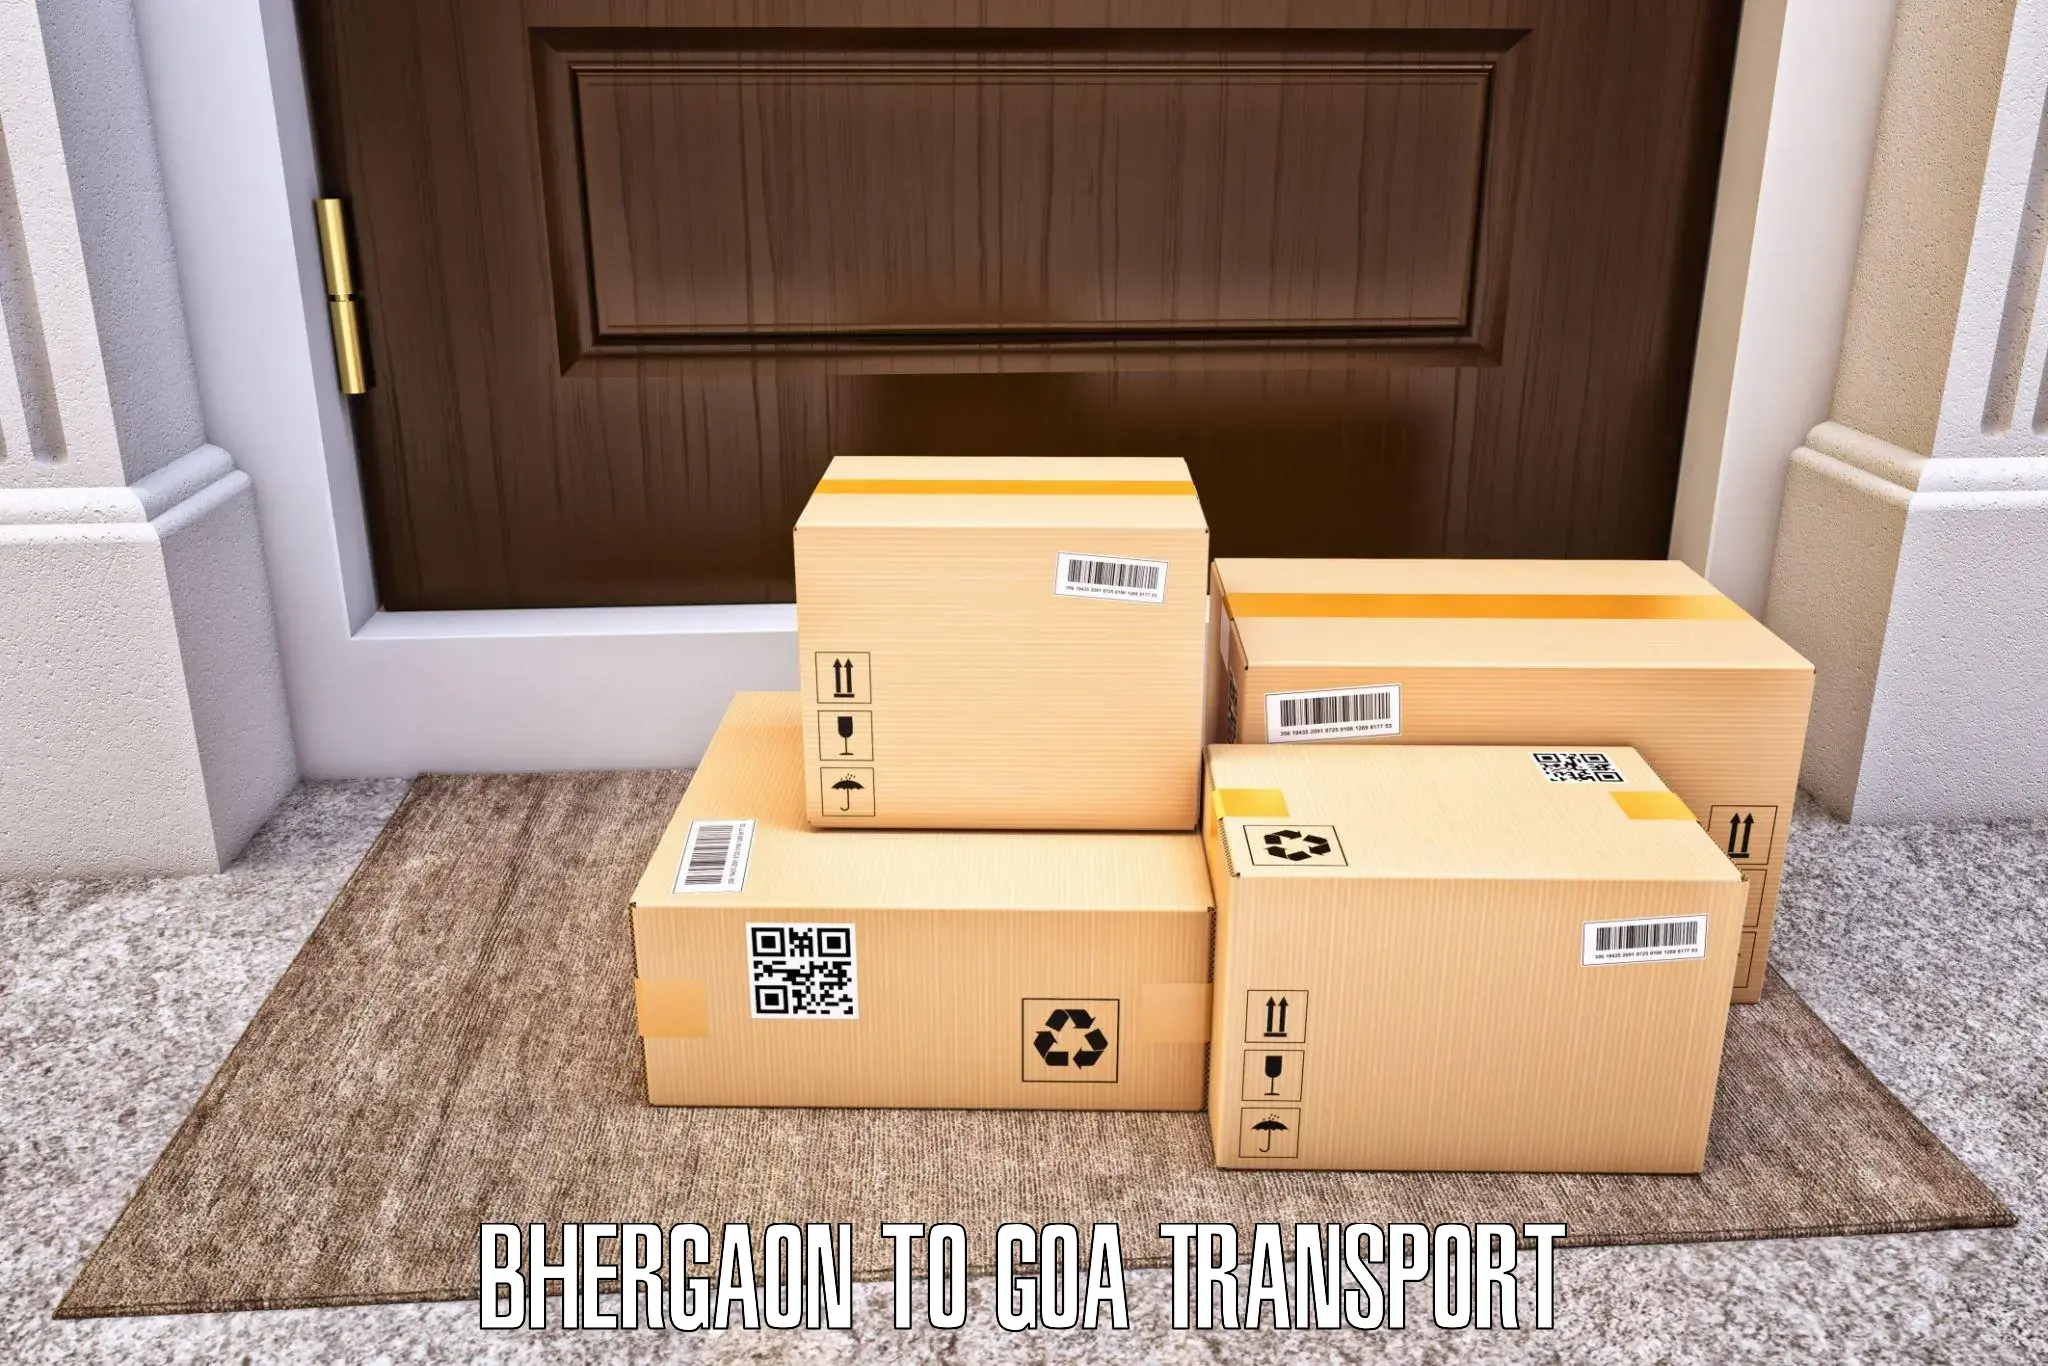 Scooty transport charges Bhergaon to Goa